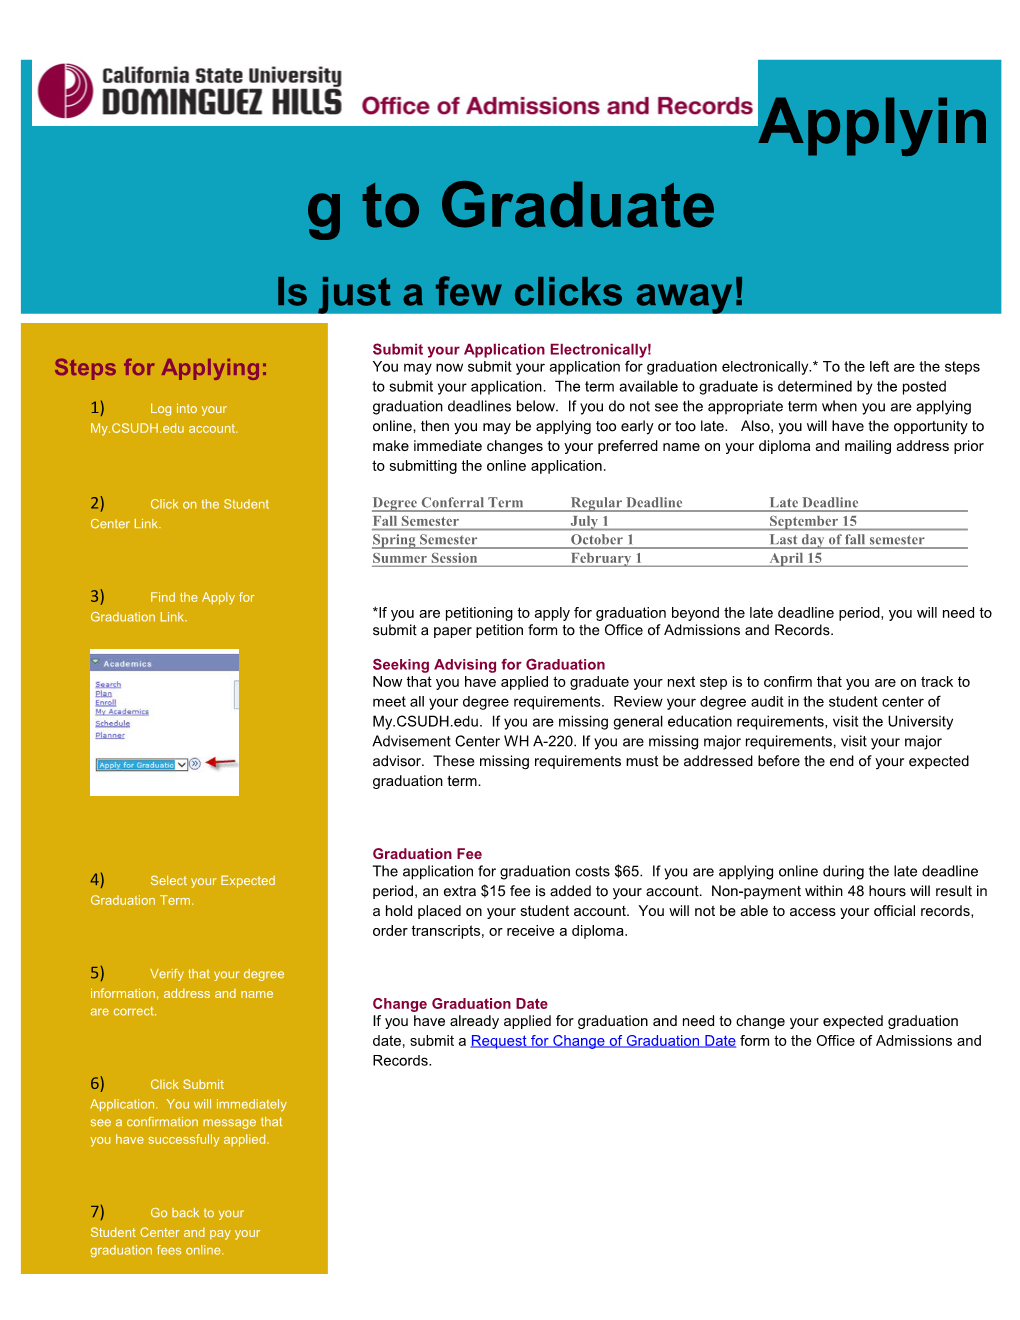 Applying to Graduate Is Just a Few Clicks Away!